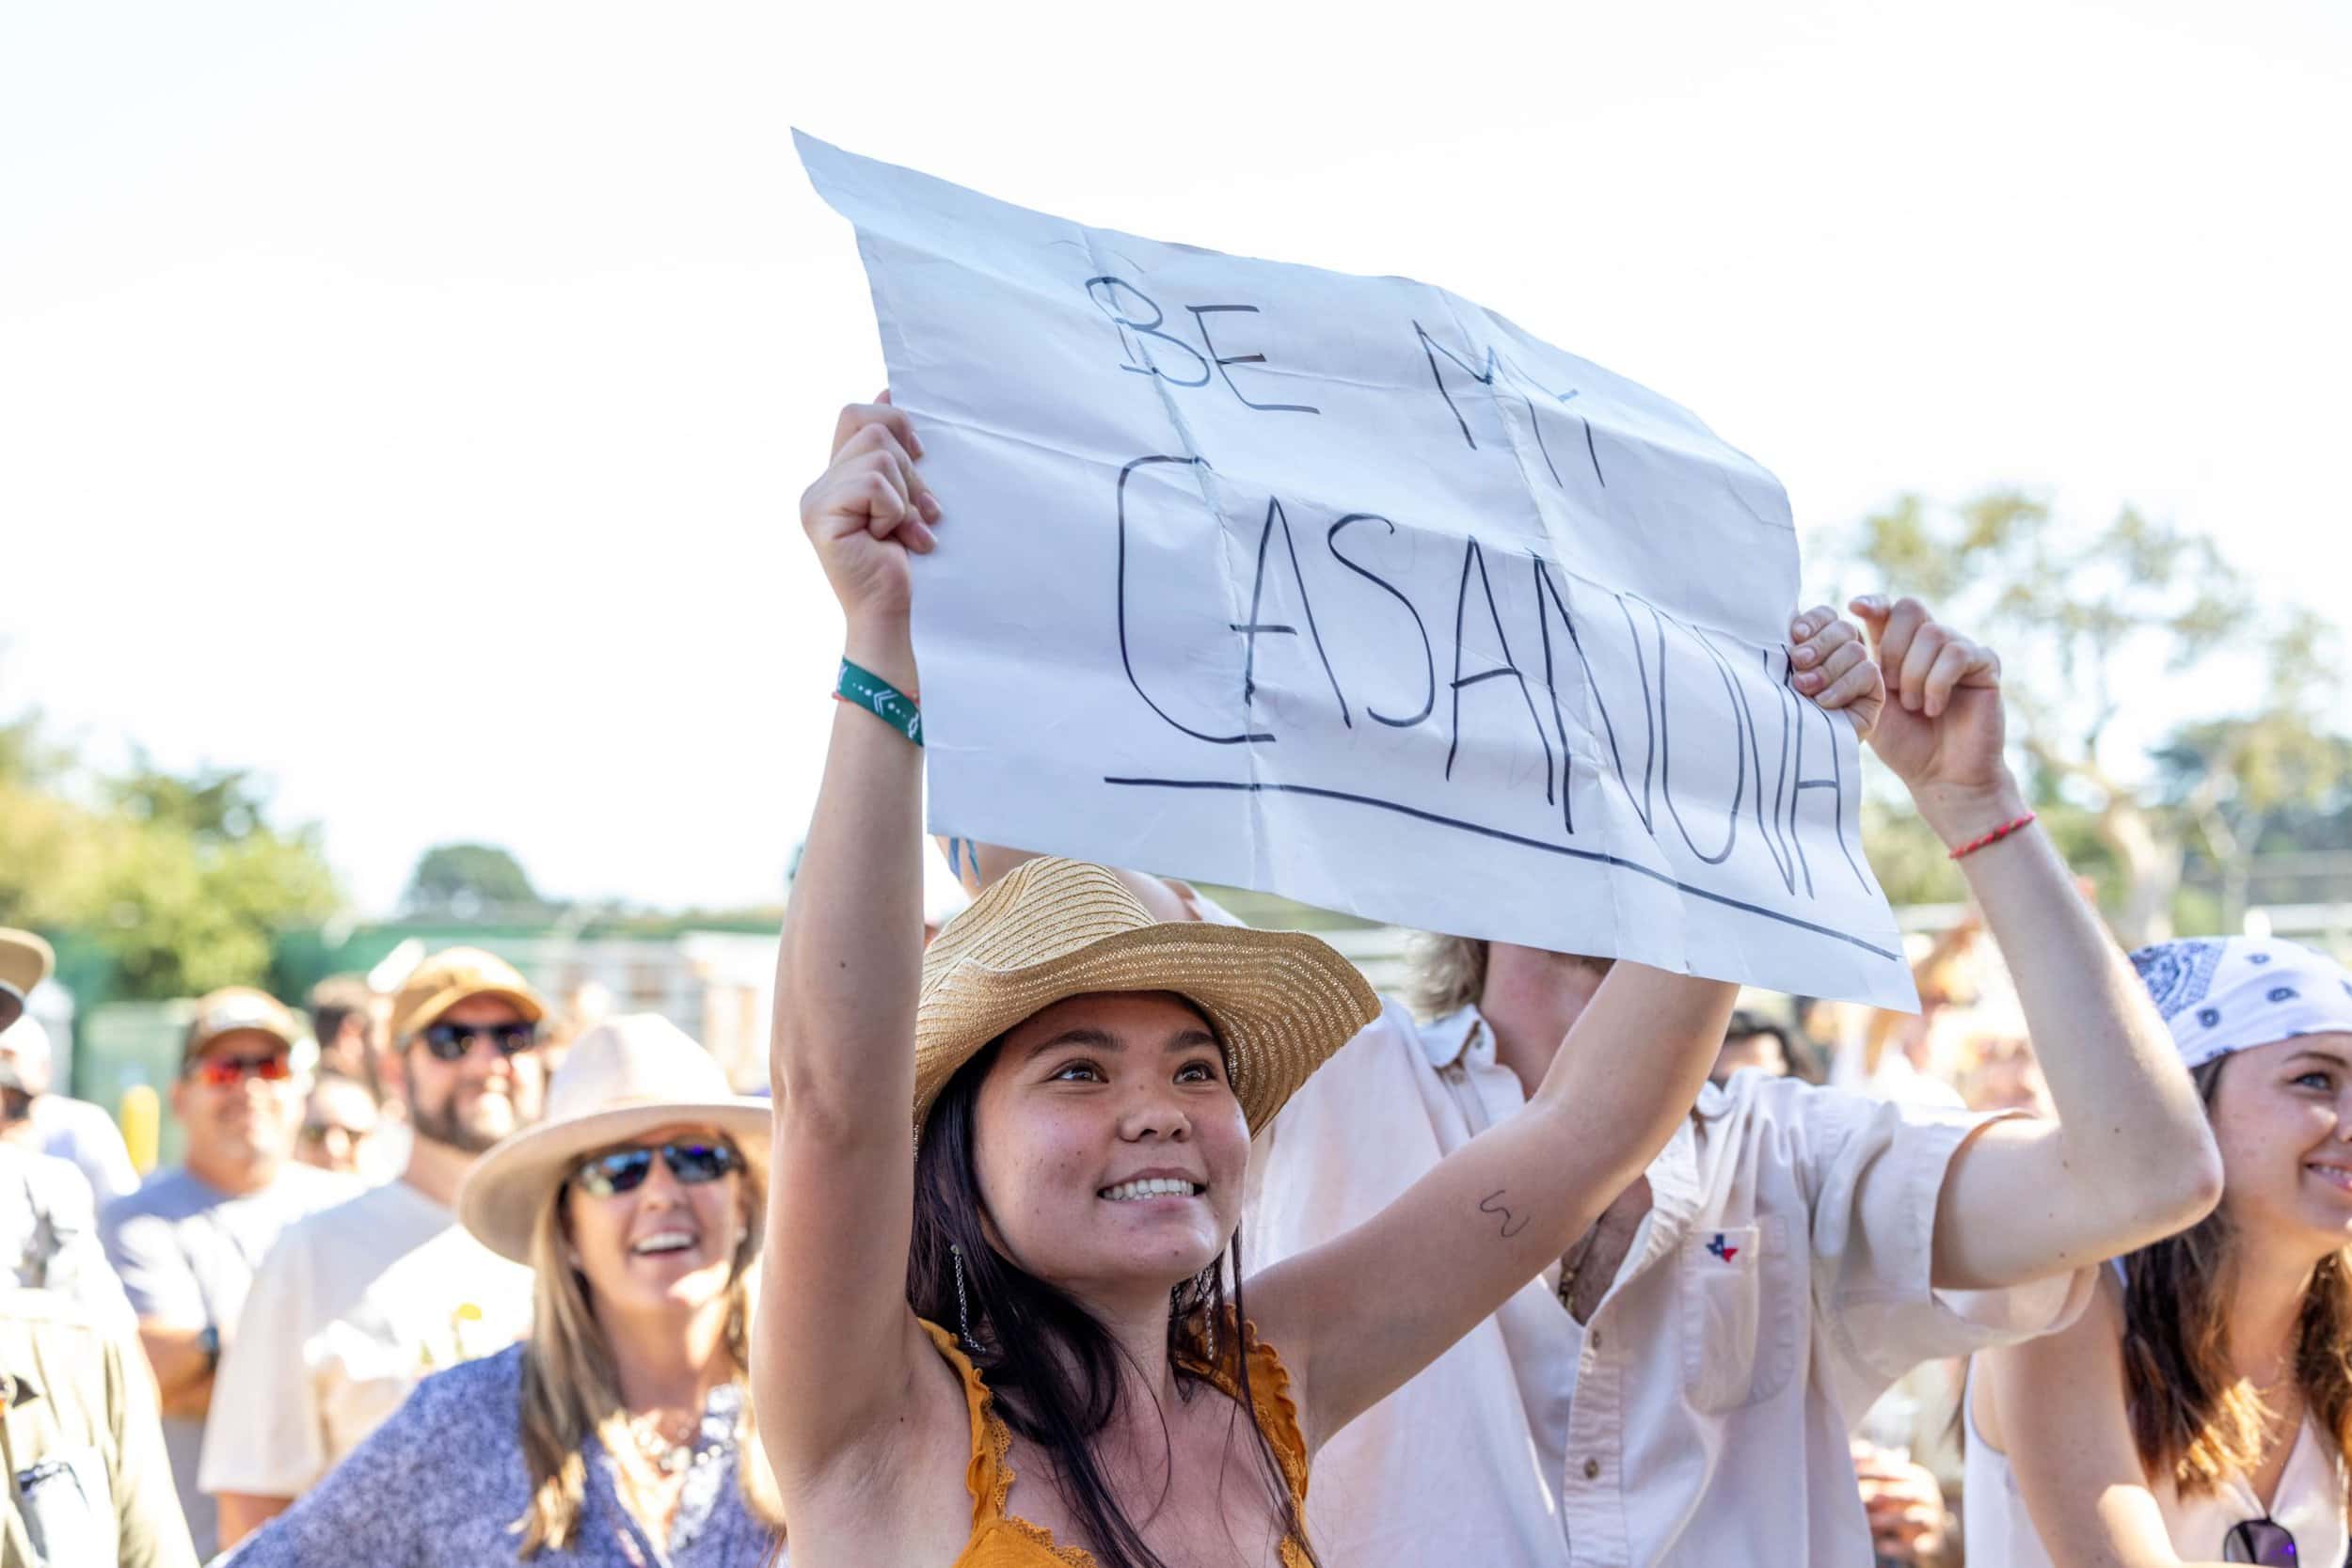 A fan raises a sign for Rayland Baxter at the Big Sur Stage.